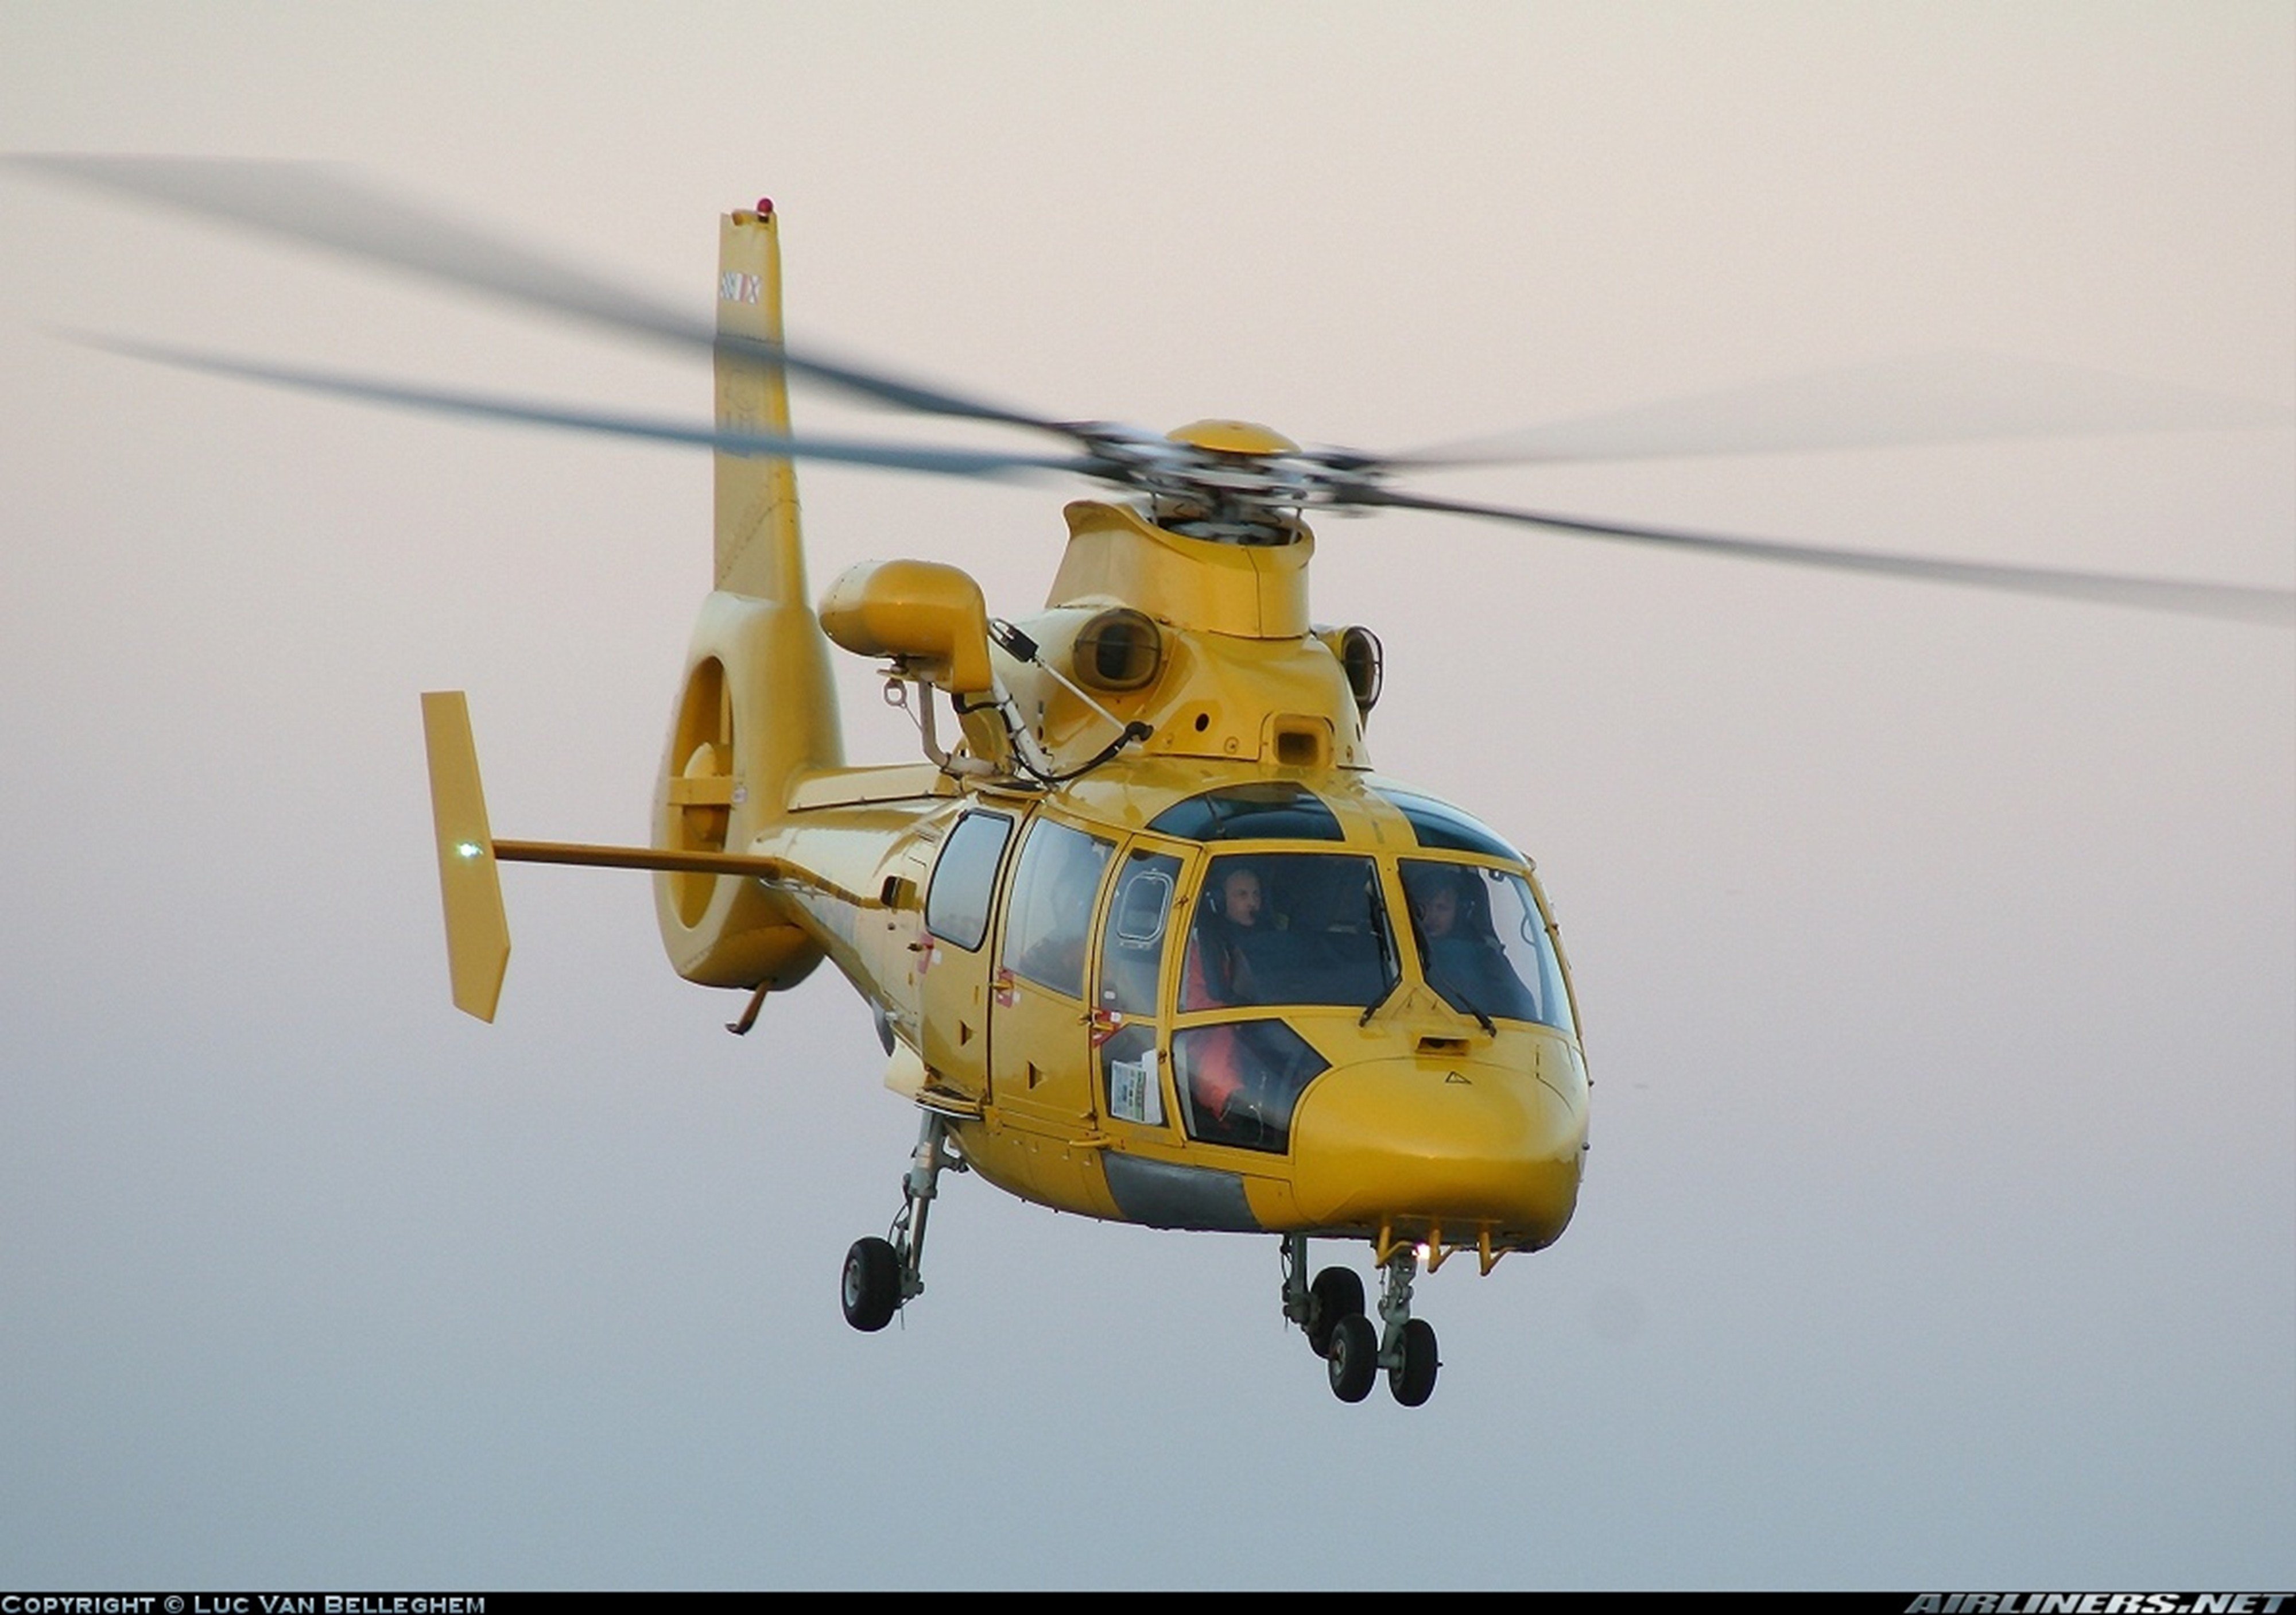 helicopter, Aircraft, Transport, Rescue, Yellow Wallpaper